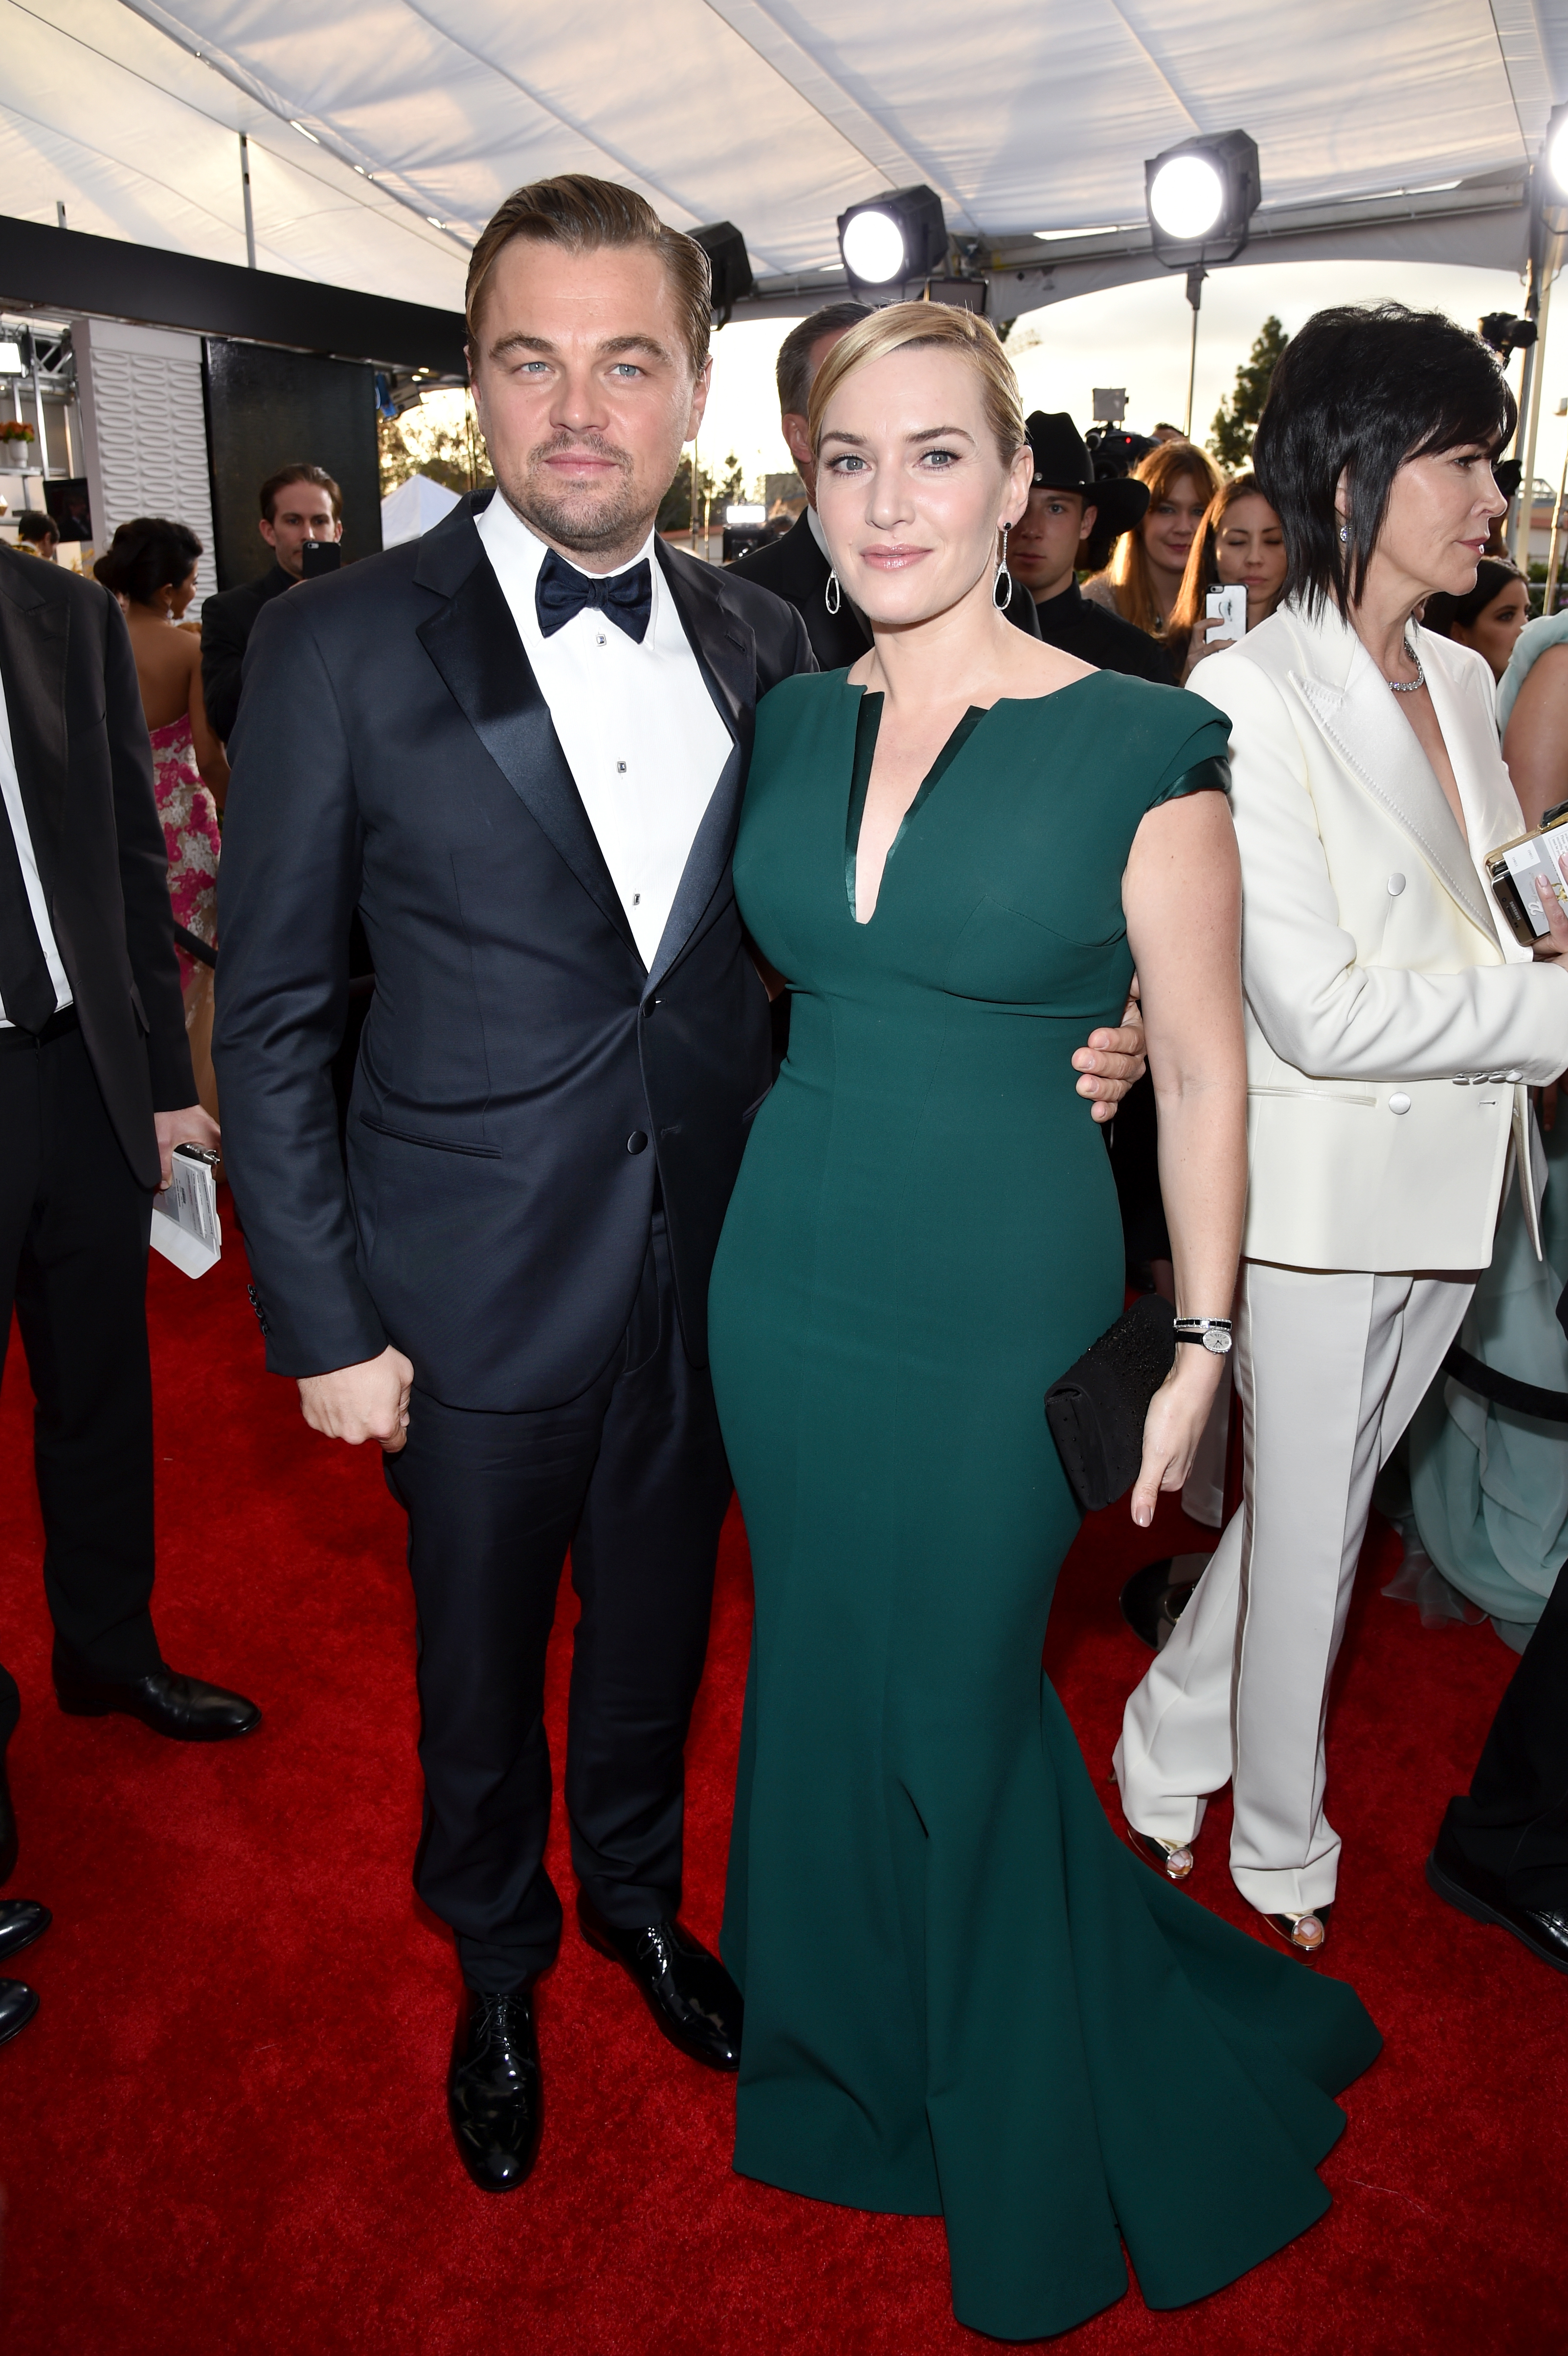 Titanic co-stars Leonardo Dicaprio and Kate Winslet stopped for a few pics in 2016